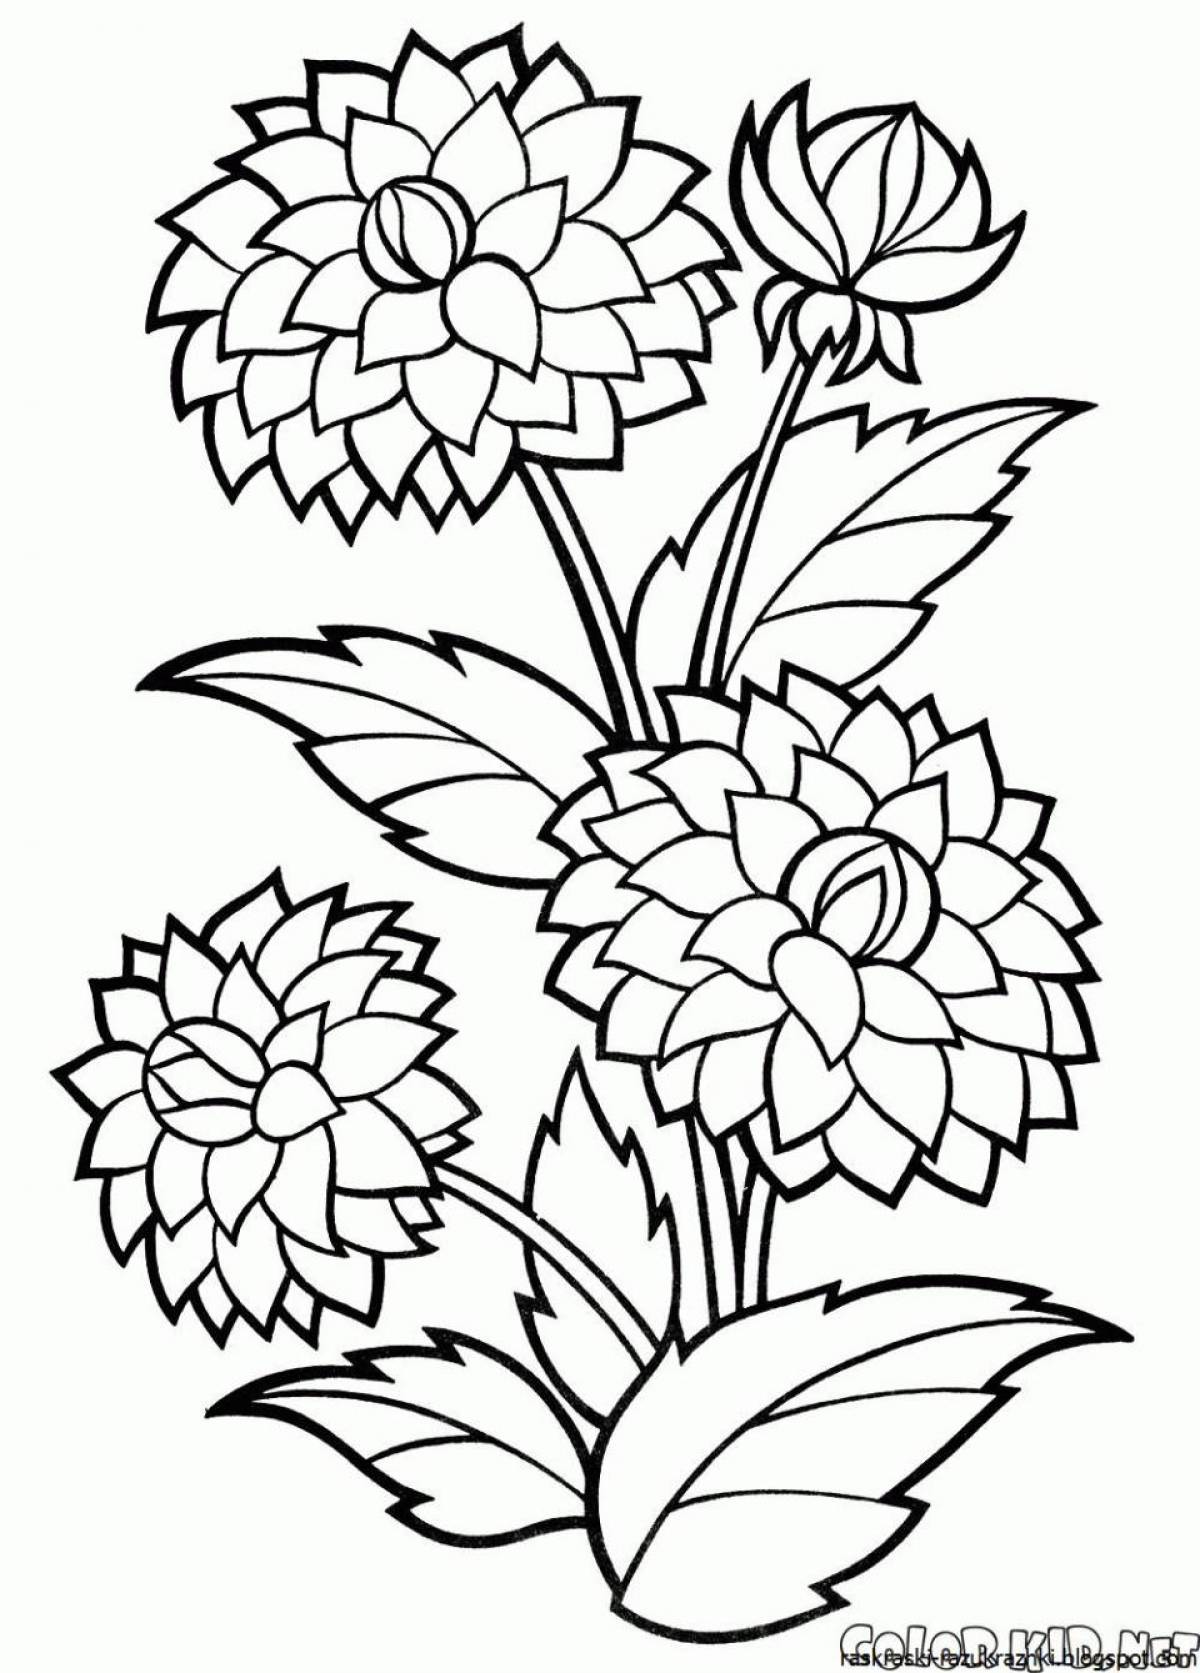 Colourful flowers coloring book for children 6-7 years old